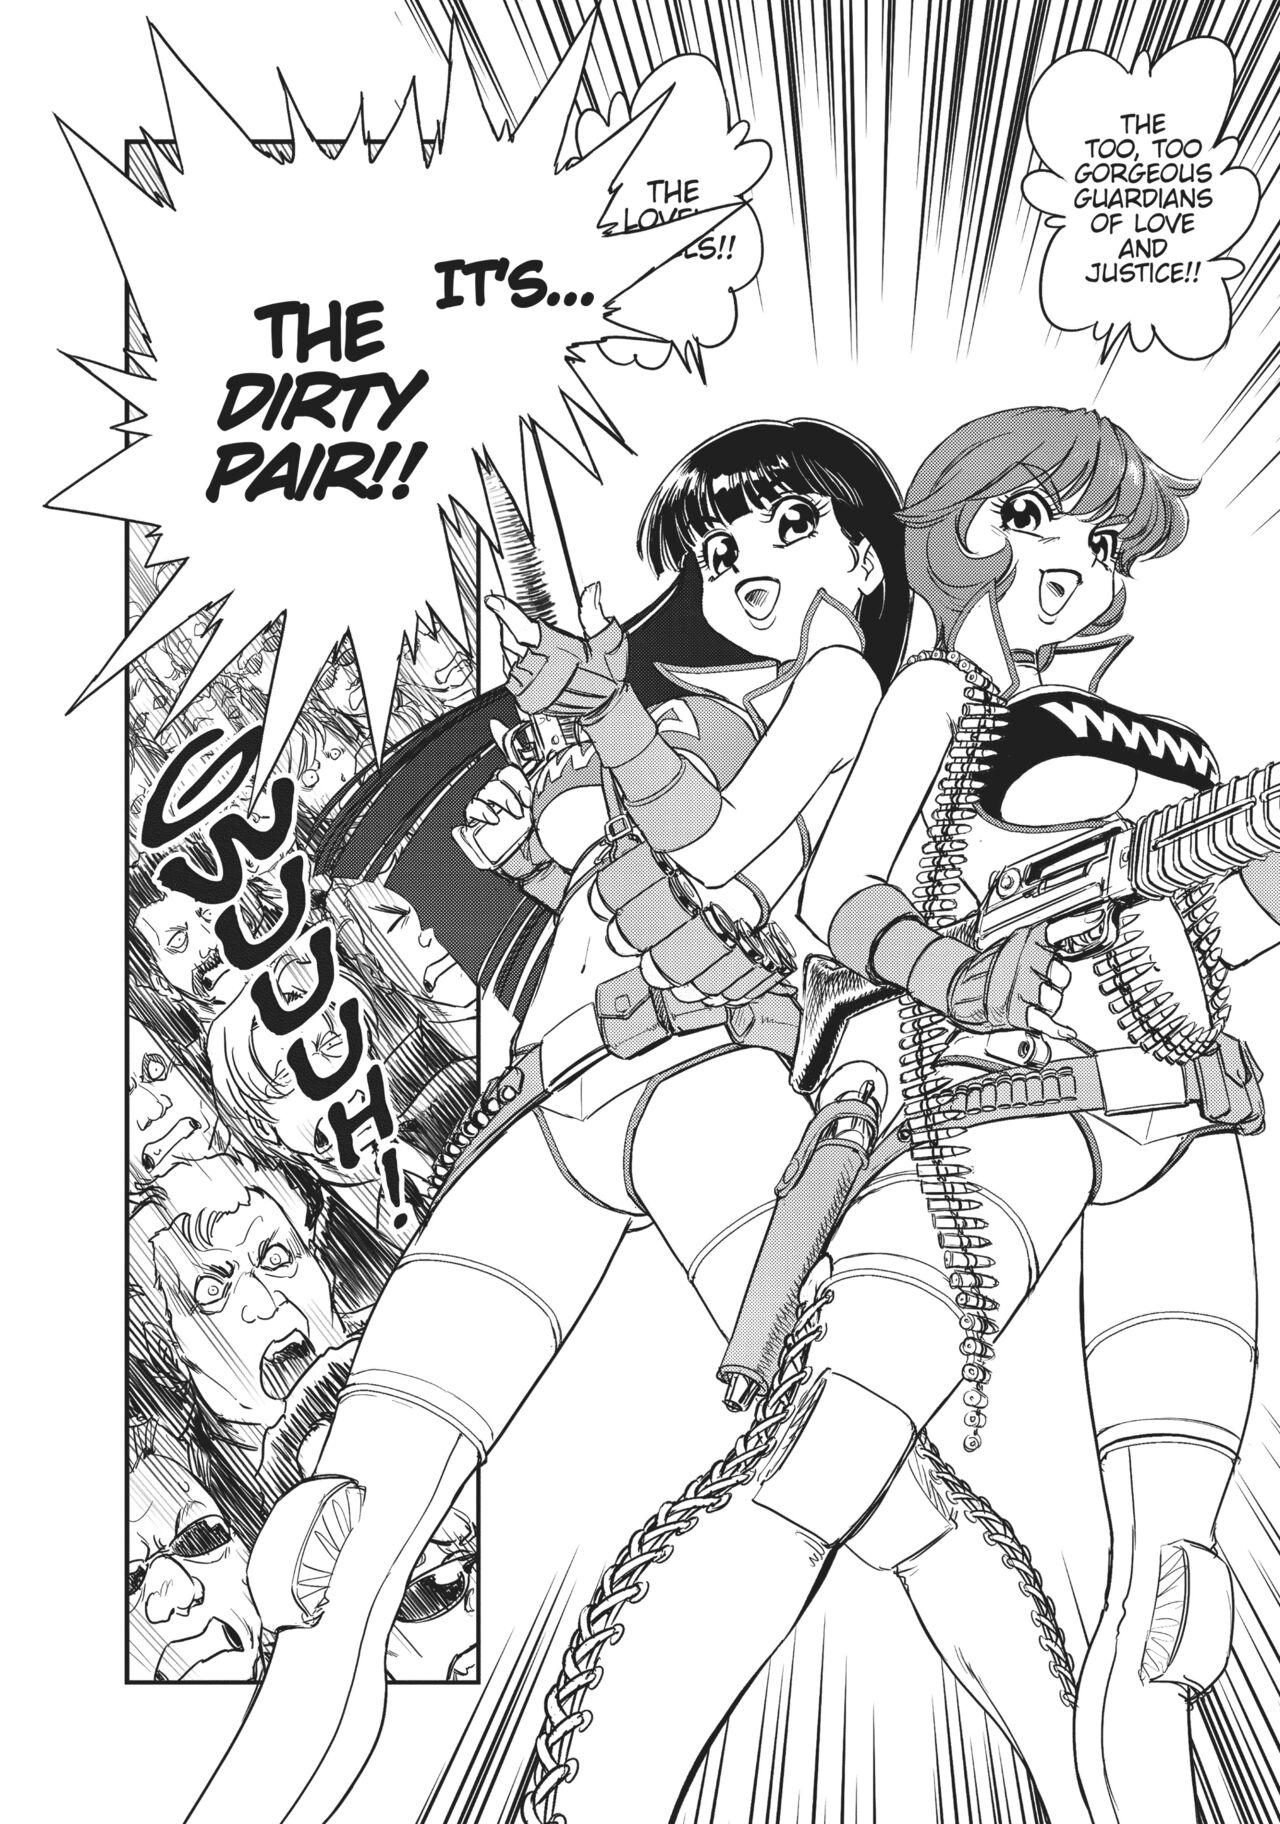 Blowjob Dirty Pair - Dirty pair Buttfucking - Page 8